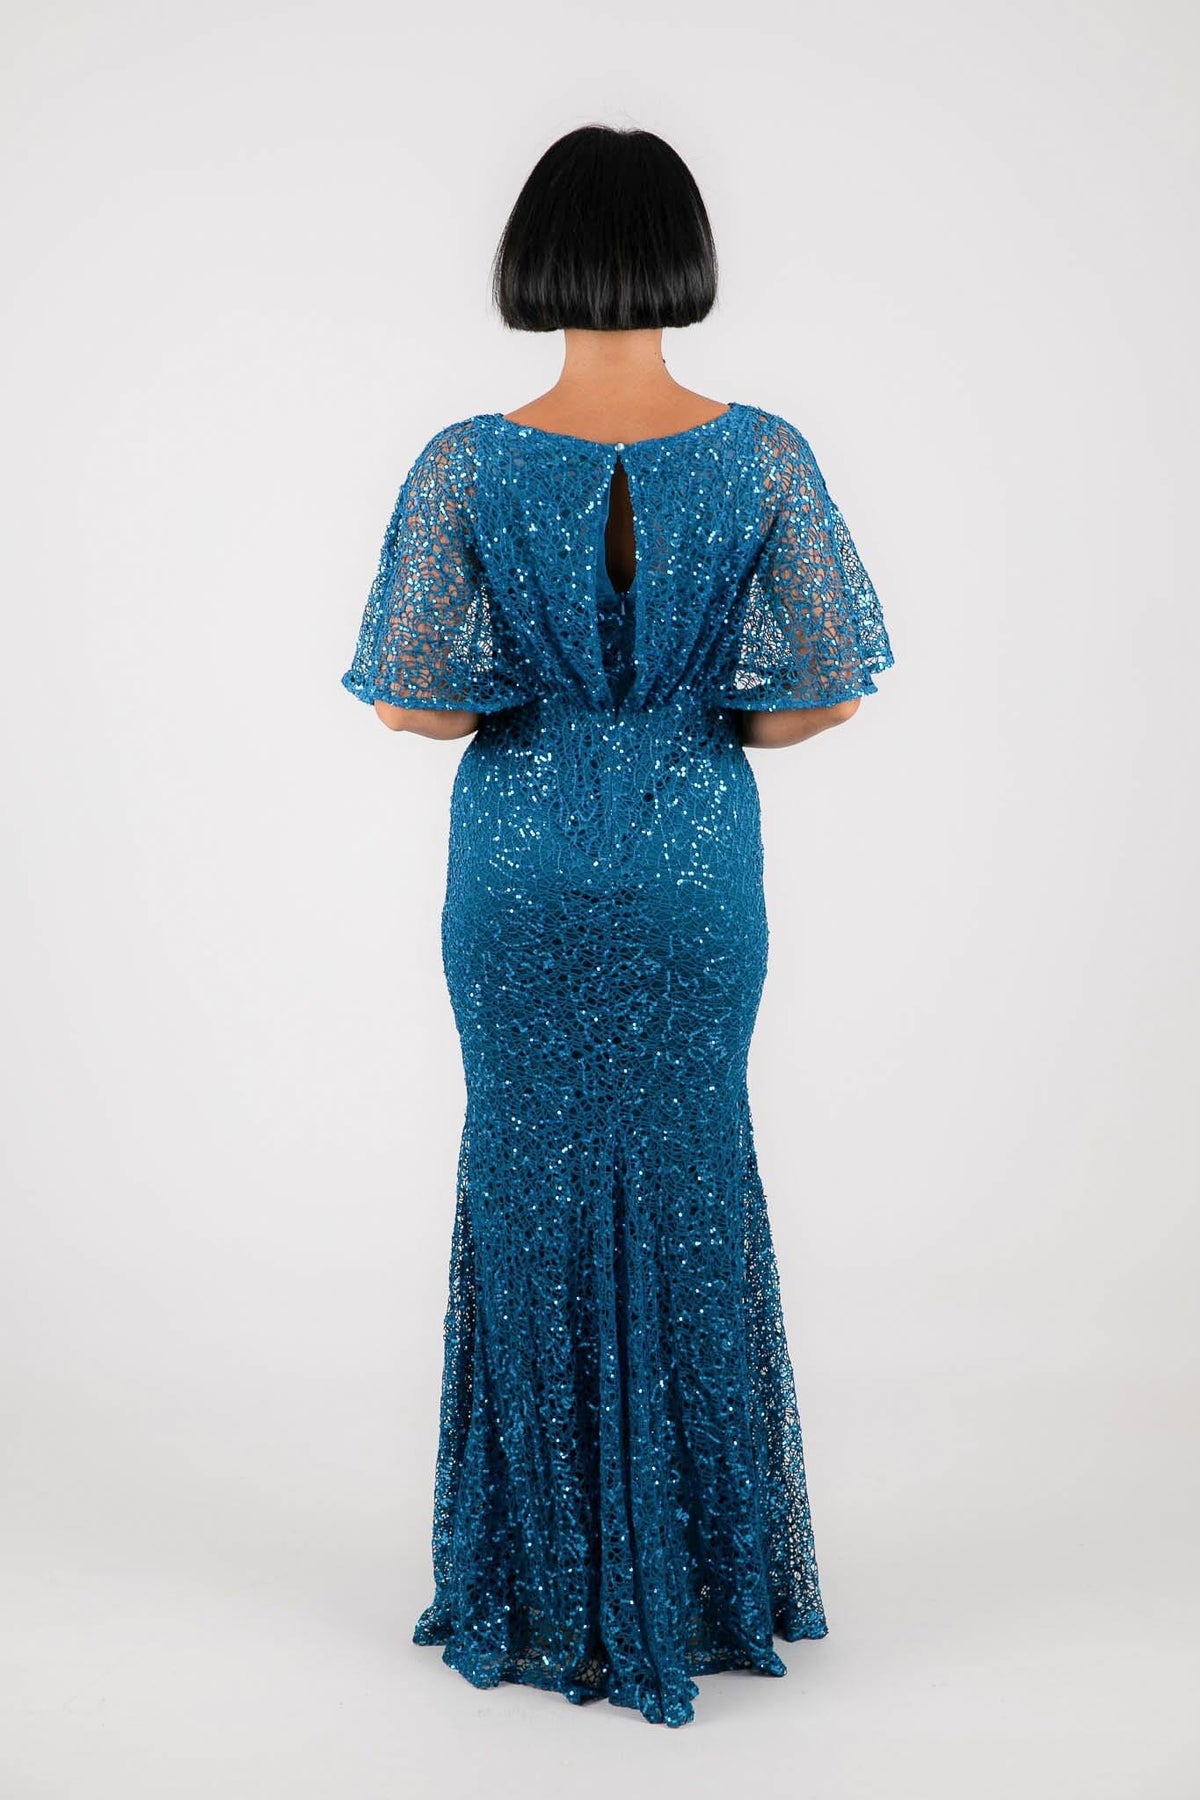 Back Image of Teal blue green sequin evening maxi dress with boat neckline and butterfly sheer half sleeves